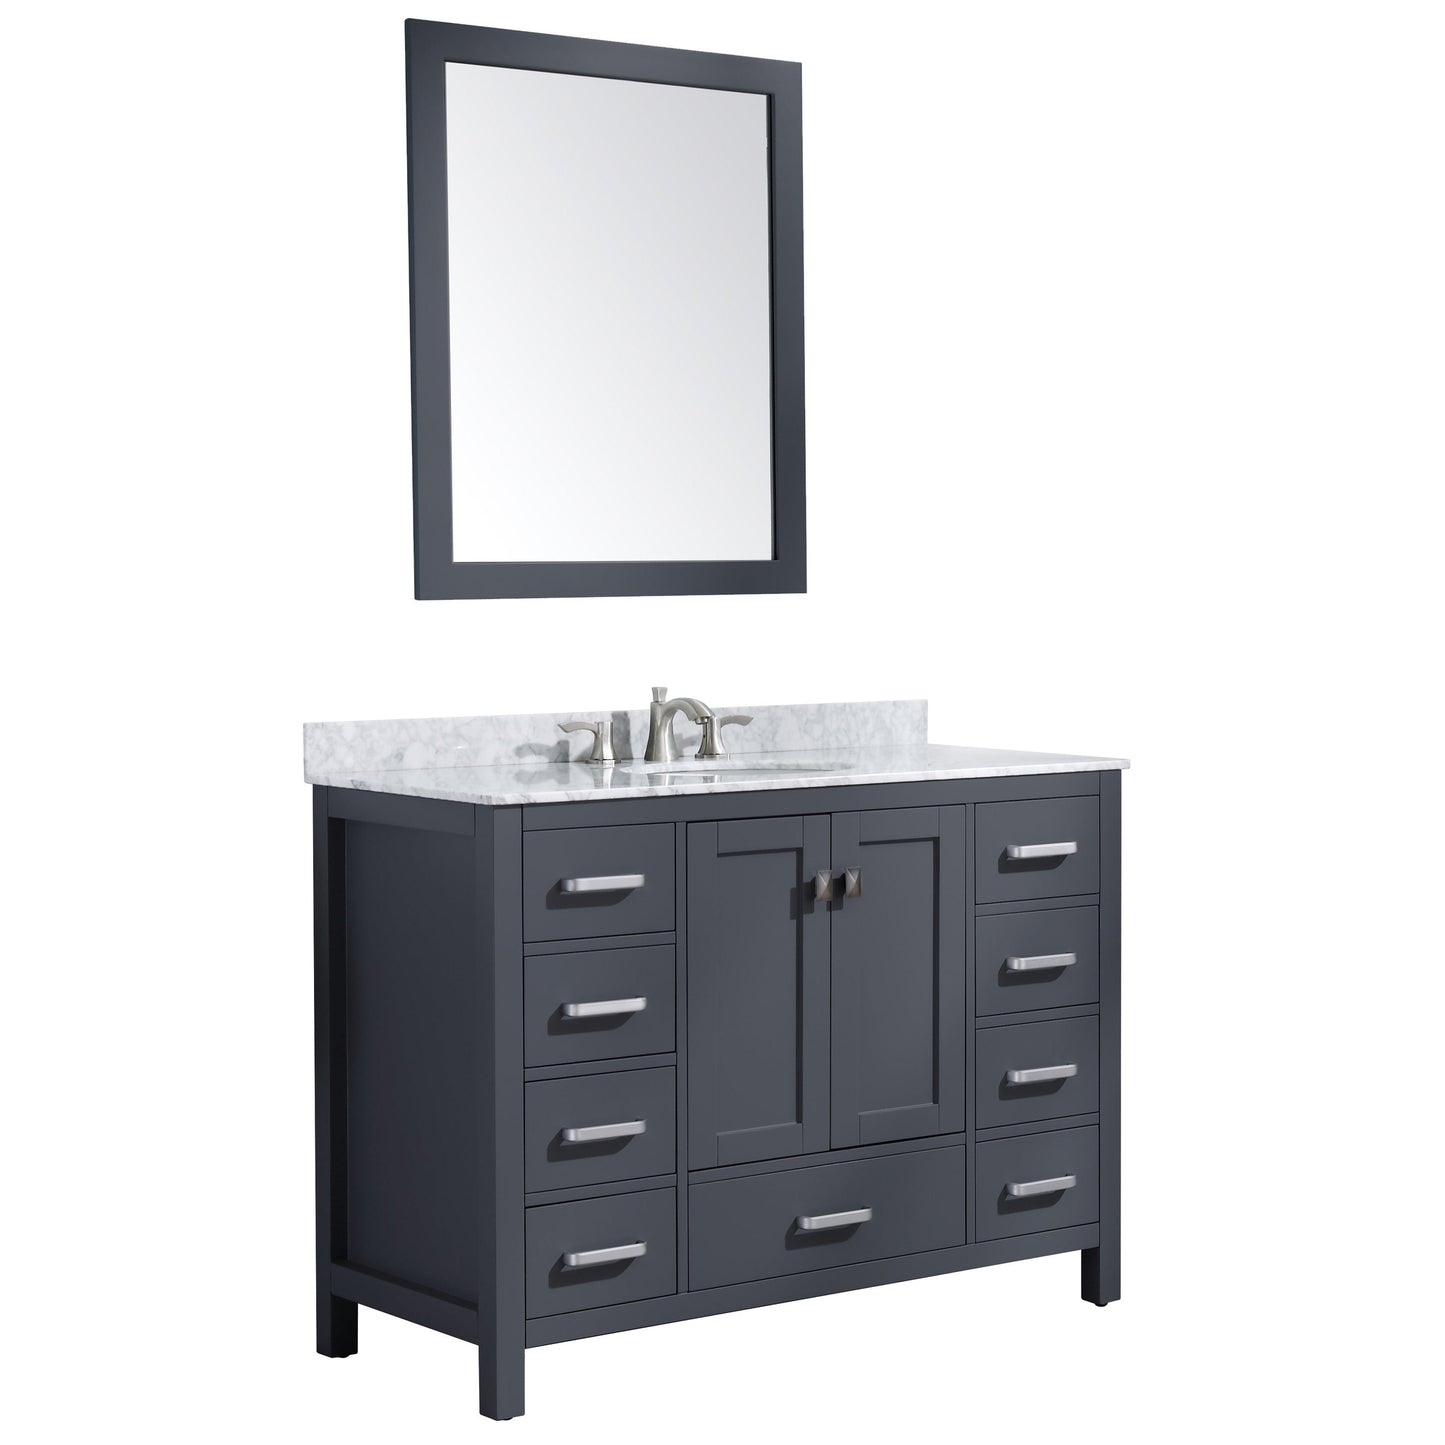 ANZZI Chateau Series 48" x 36" Rich Gray Solid Wood Bathroom Vanity With White Carrara Marble Countertop, Basin Sink and Mirror